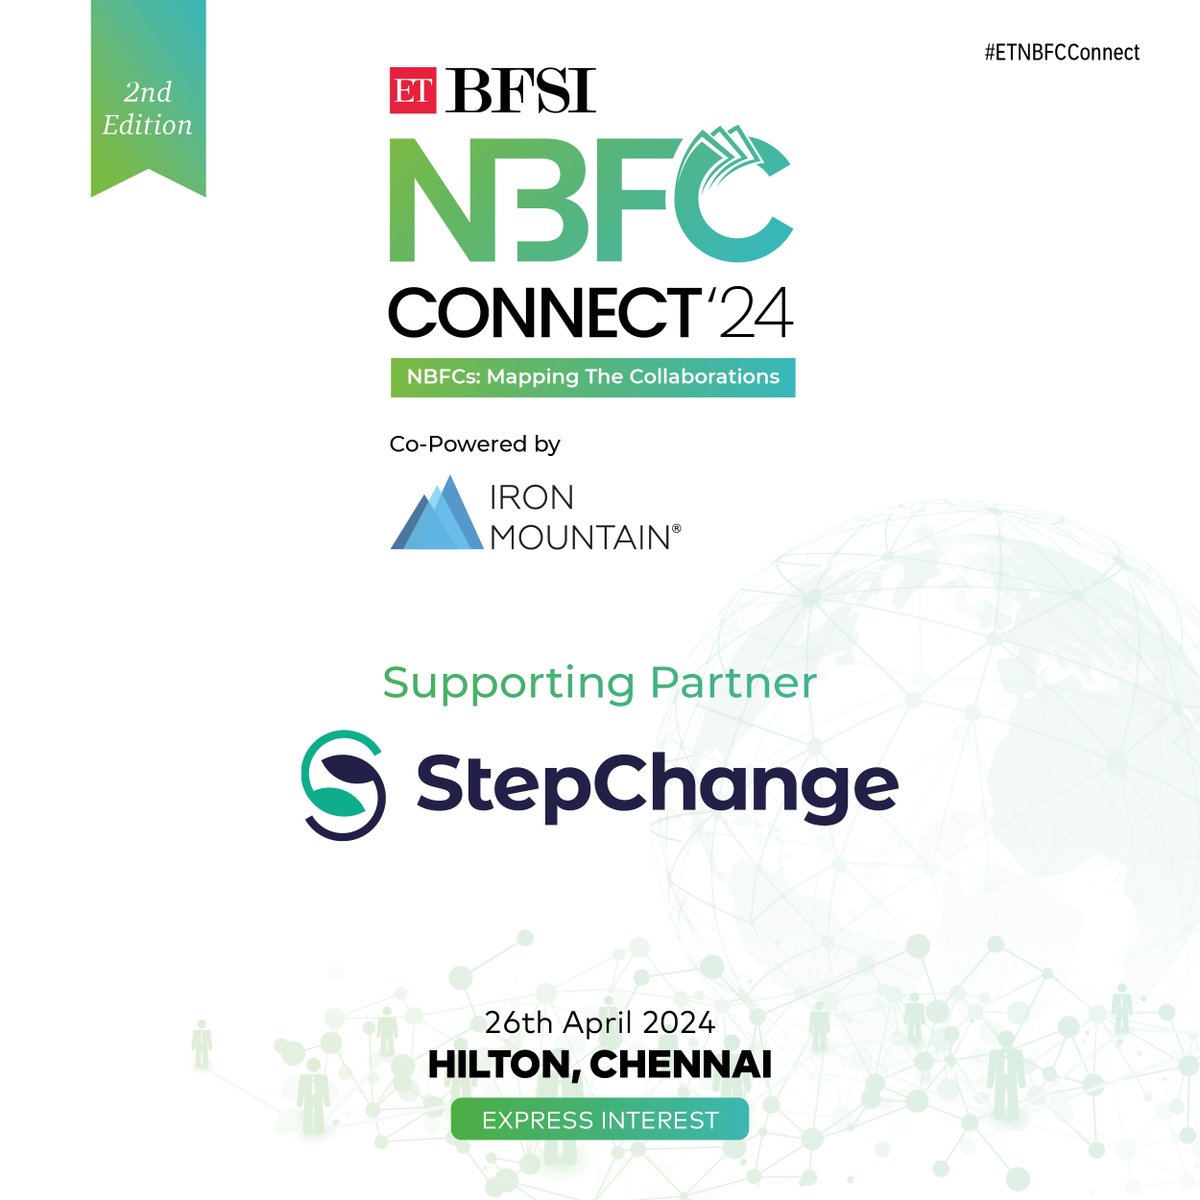 Thrilled to welcome our Supporting Partner, StepChange, for the #ETNBFCConnect 2024 in Chennai on April 26th! 

Together, we're paving the way for financial transformation and innovation in the NBFC sector. 

Know more- bit.ly/3Owey9x